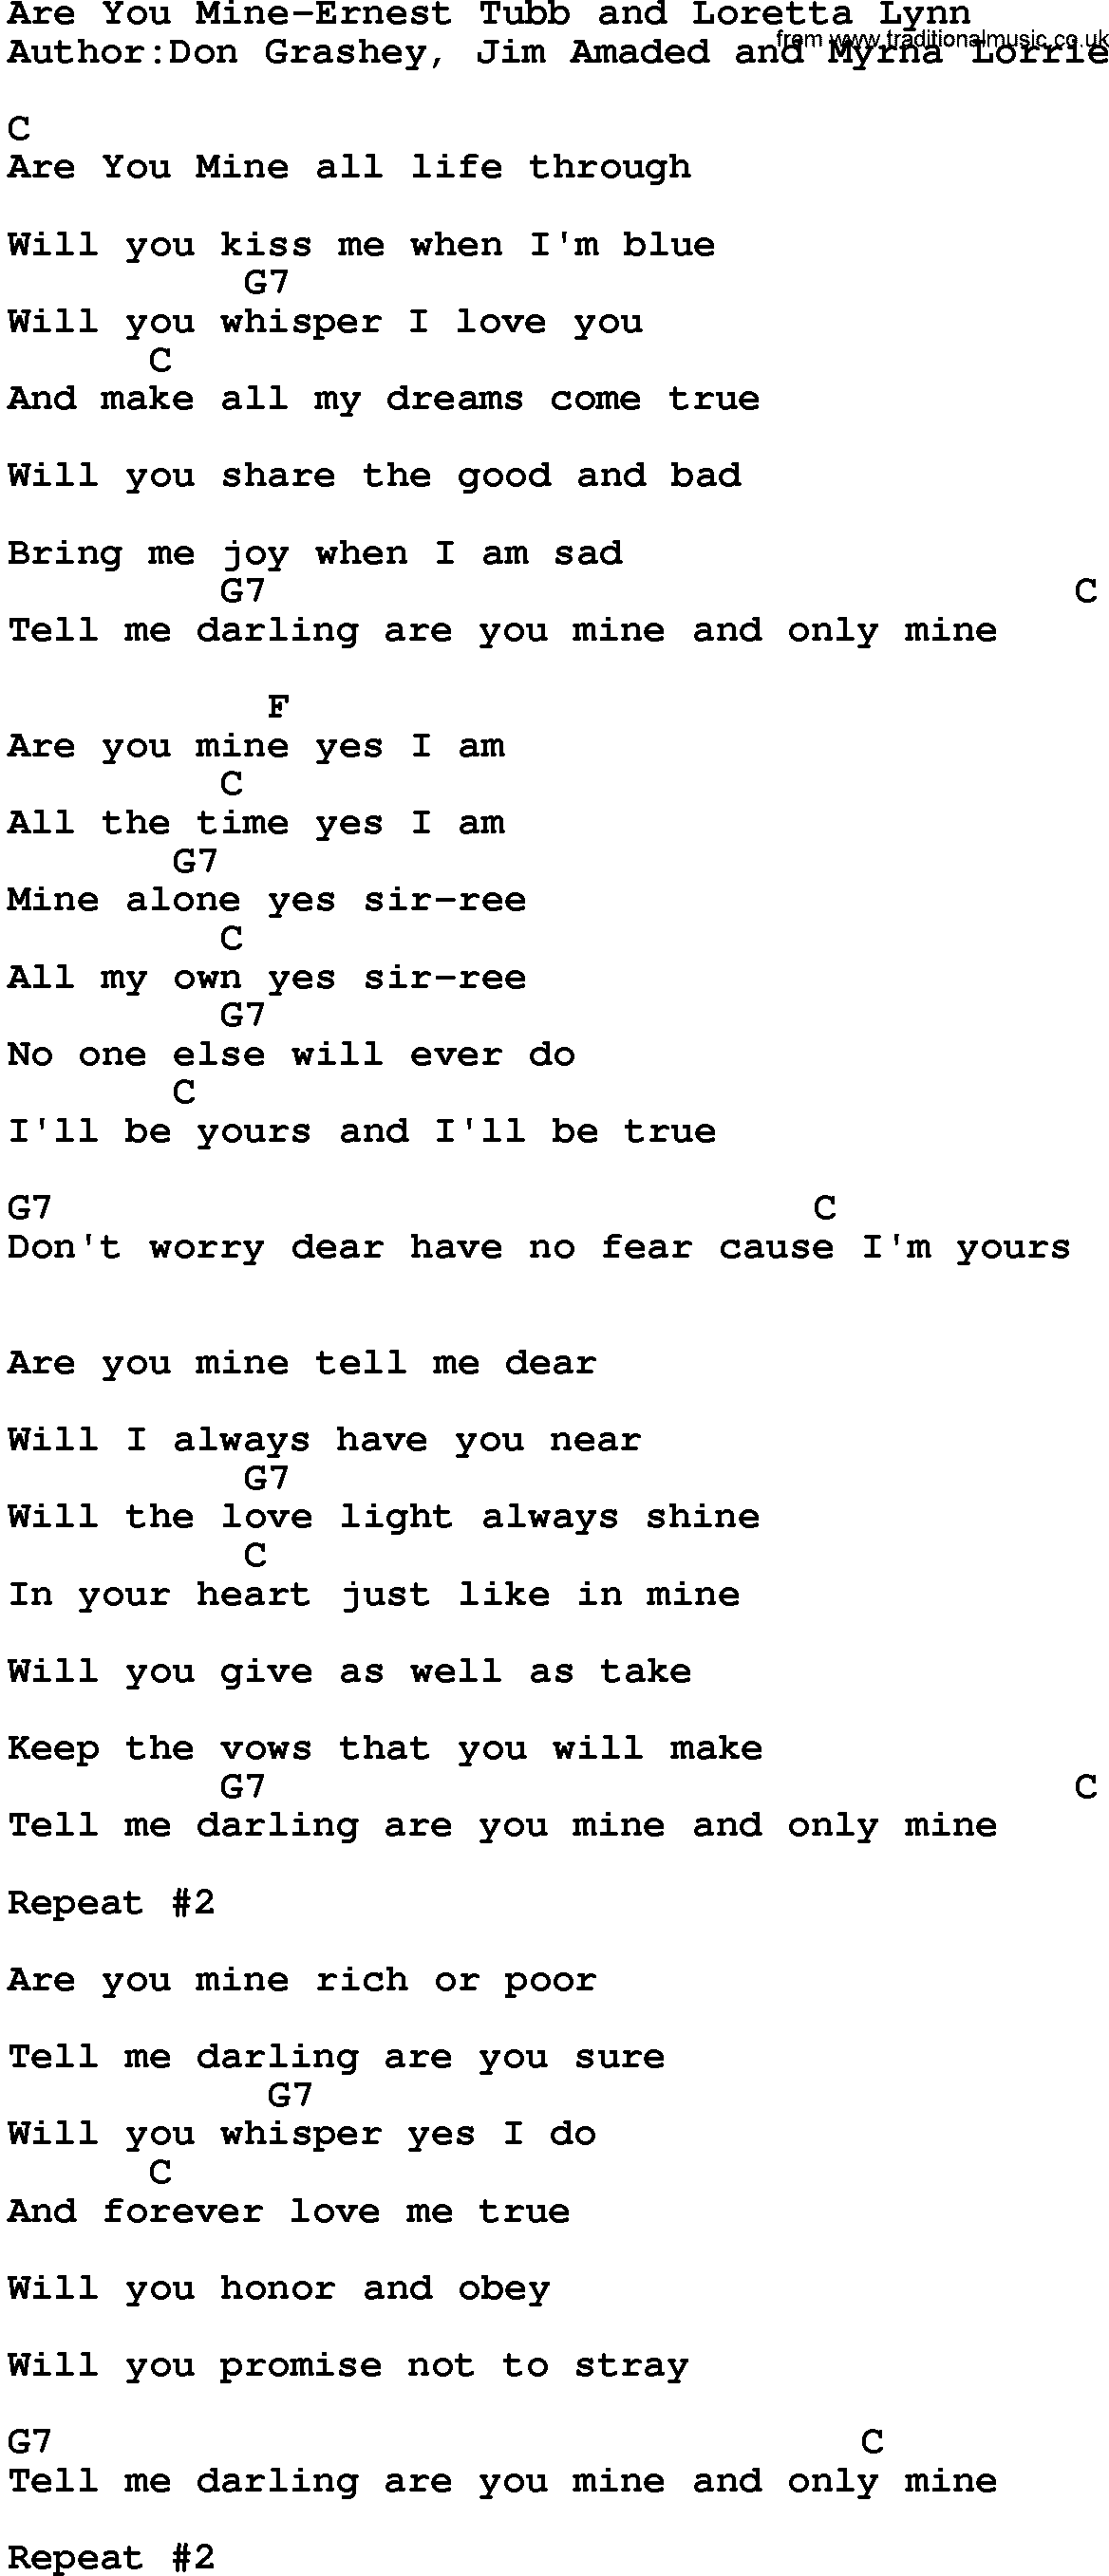 Country music song: Are You Mine-Ernest Tubb And Loretta Lynn lyrics and chords